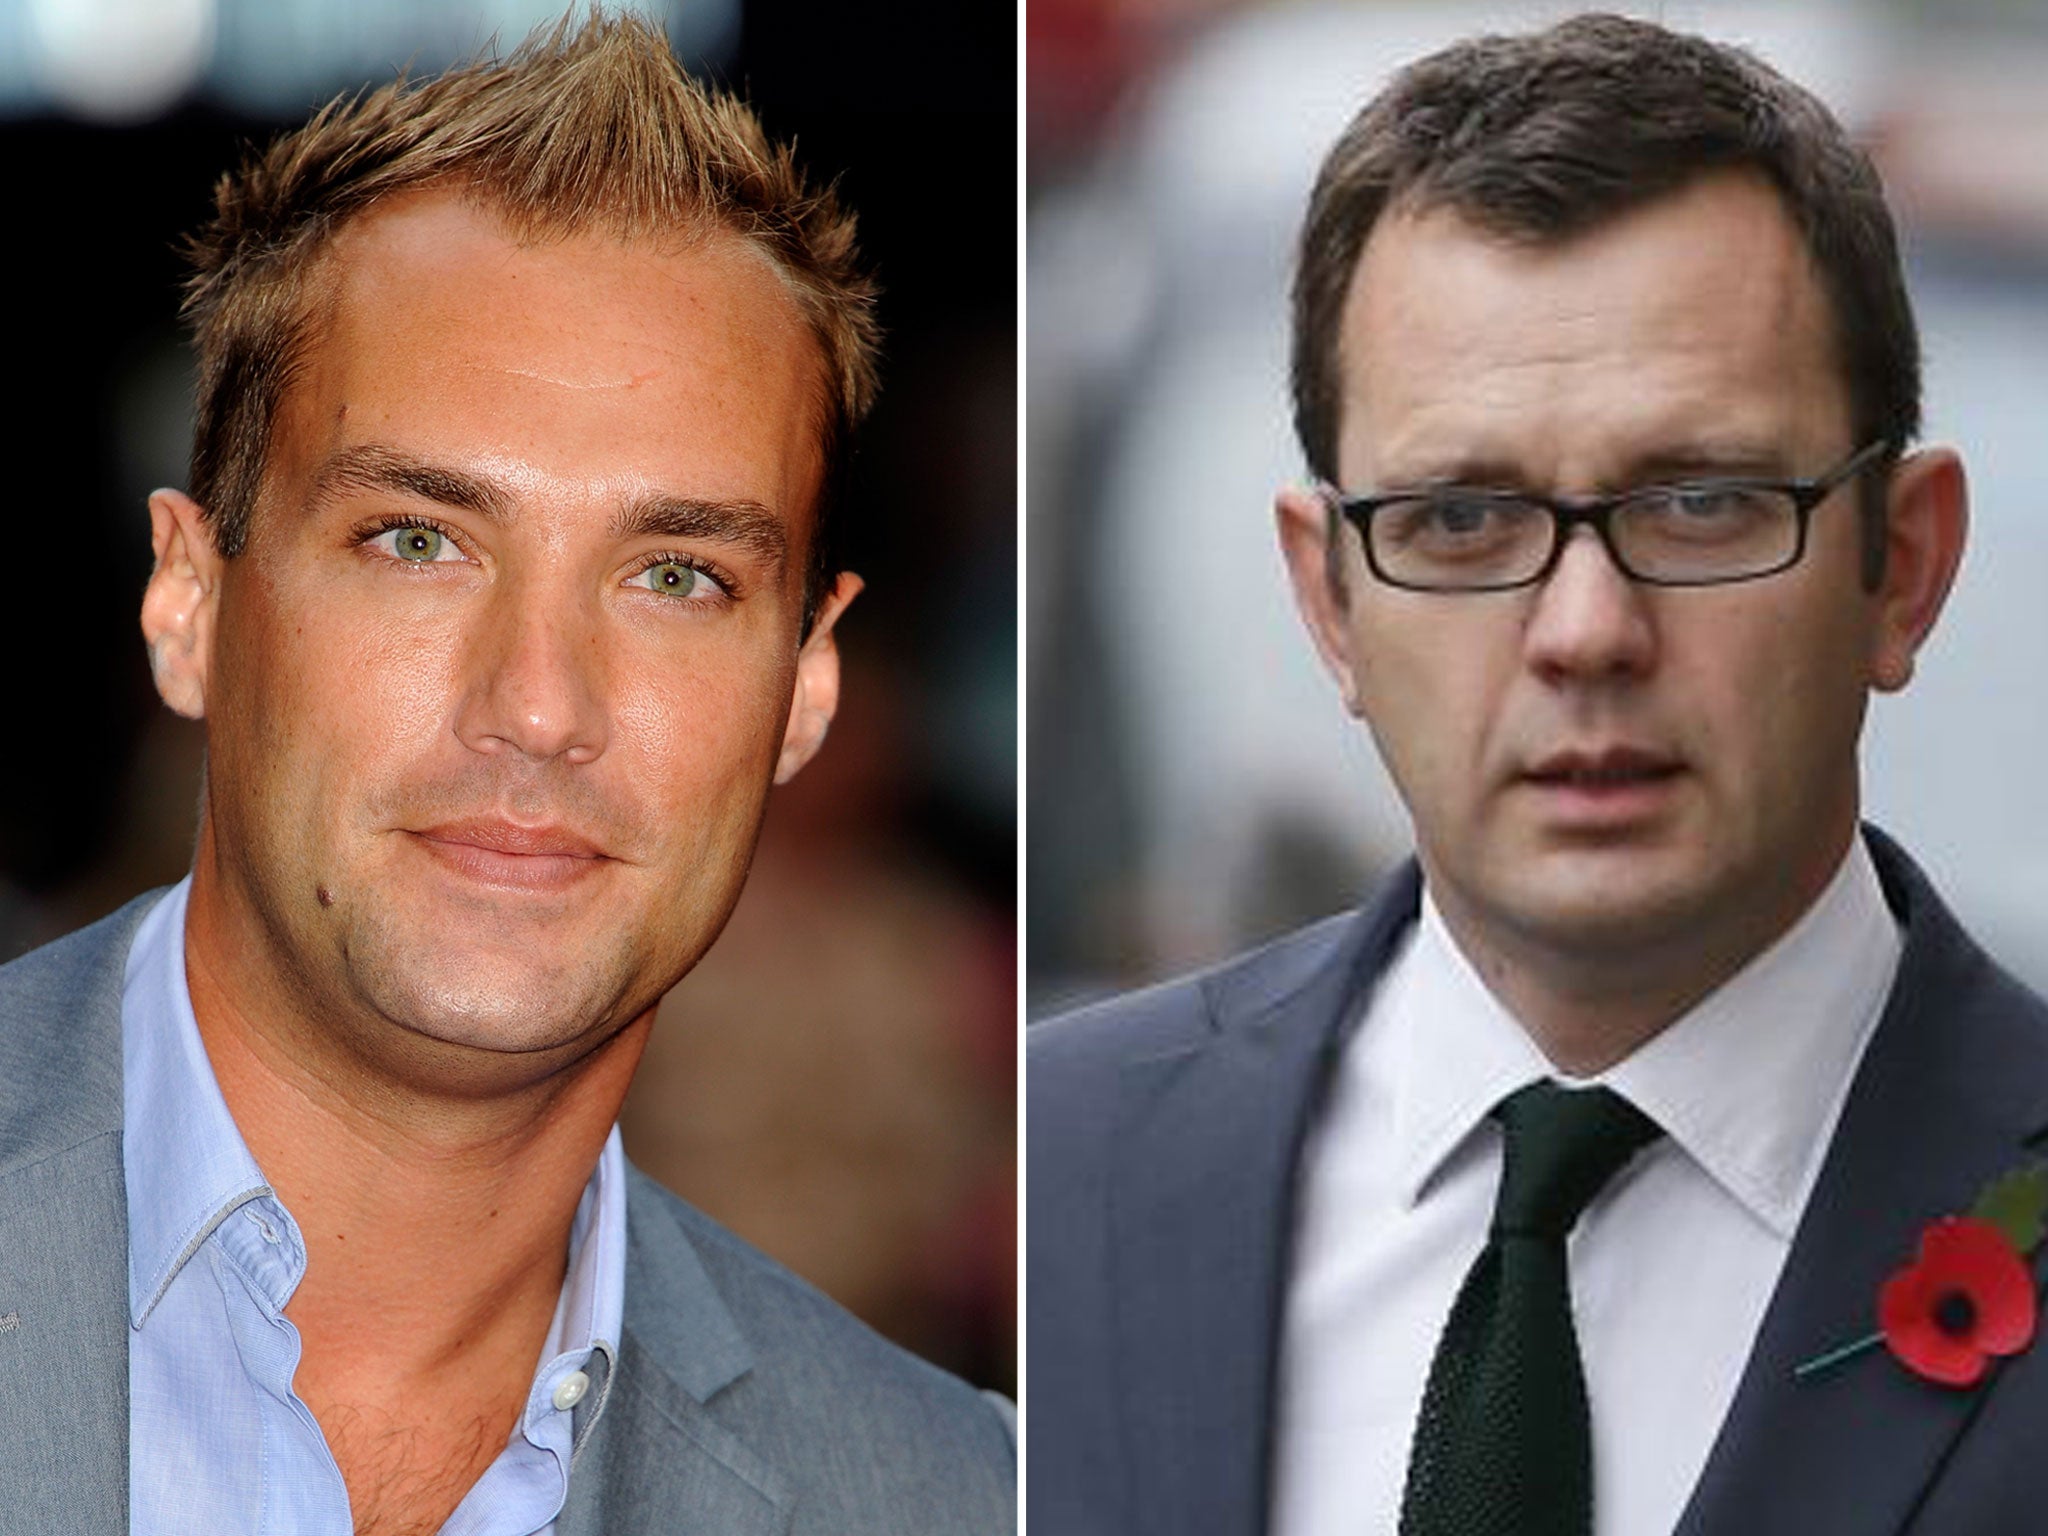 Andy Coulson told a journalist investigating a story on Calum Best, son of footballer George Best, to "do his phone" - the hacking trial was told